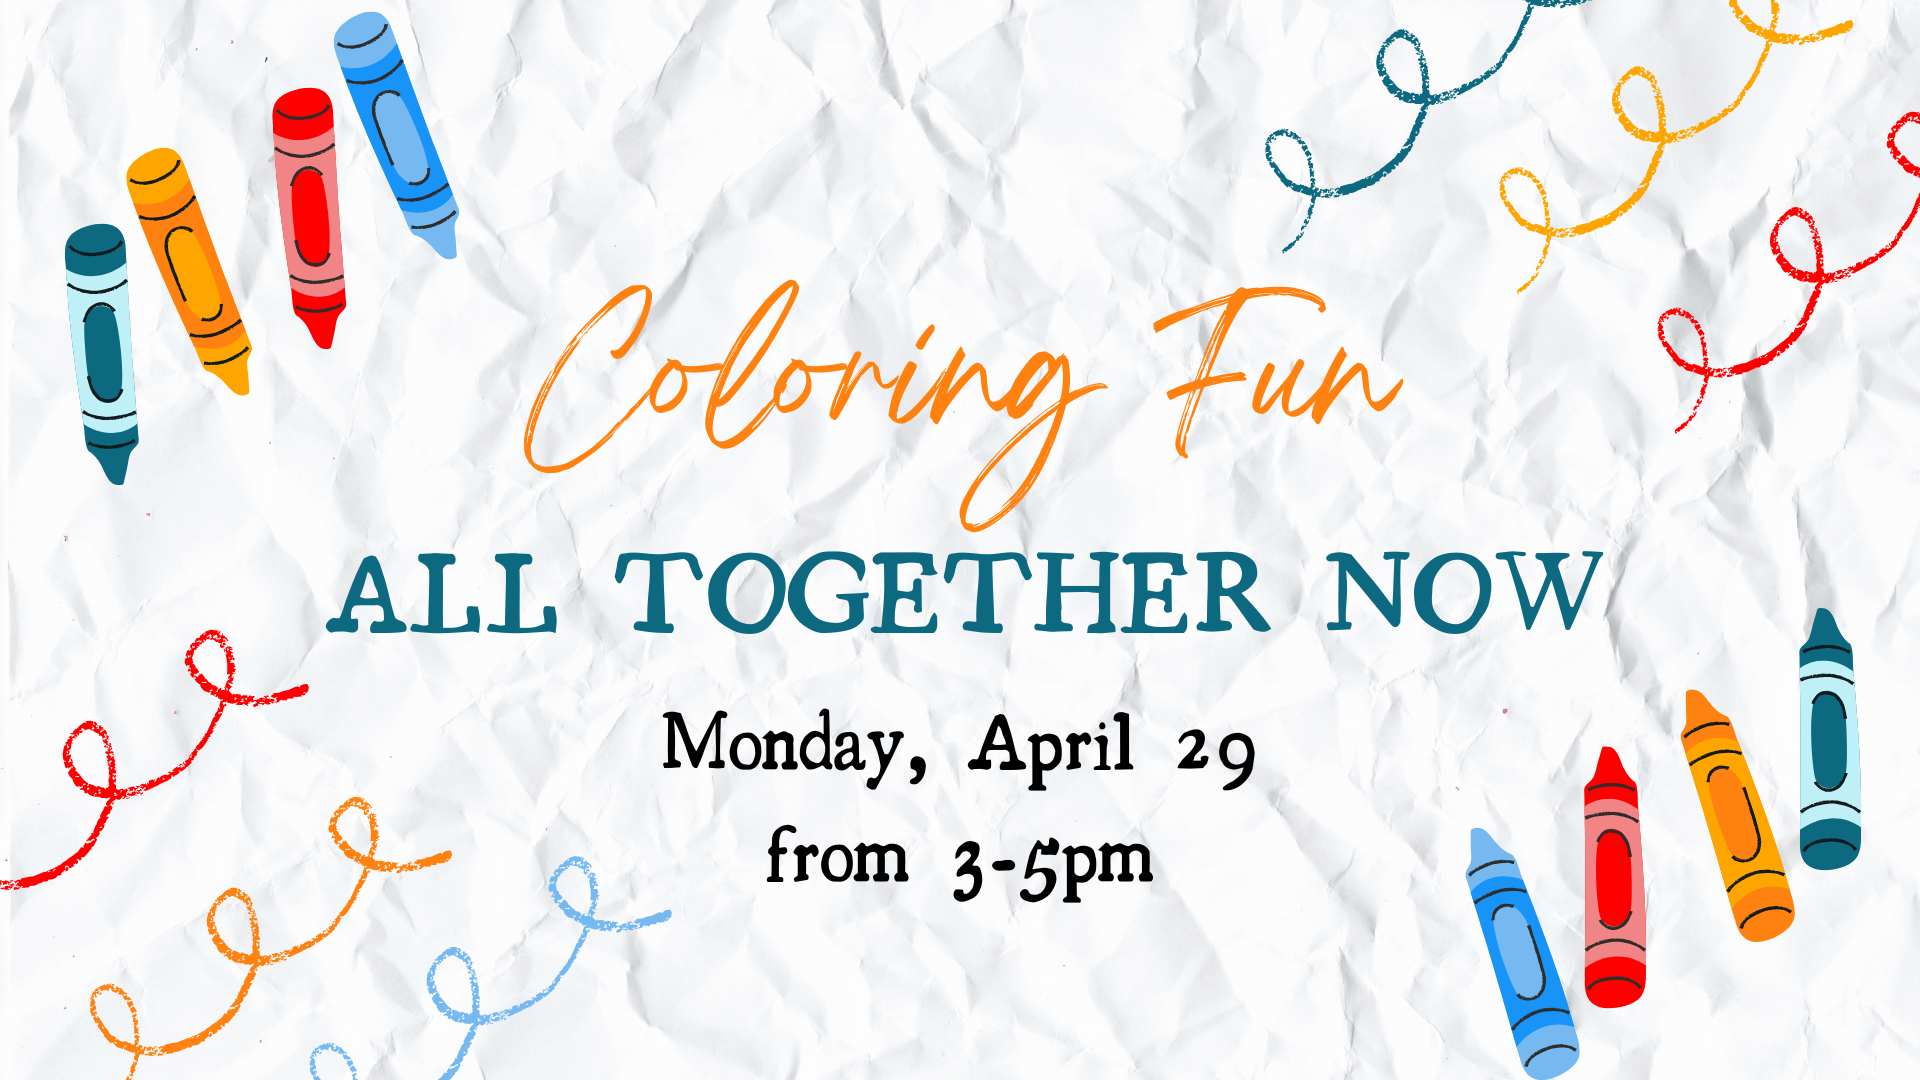 All Together Now: Coloring Fun